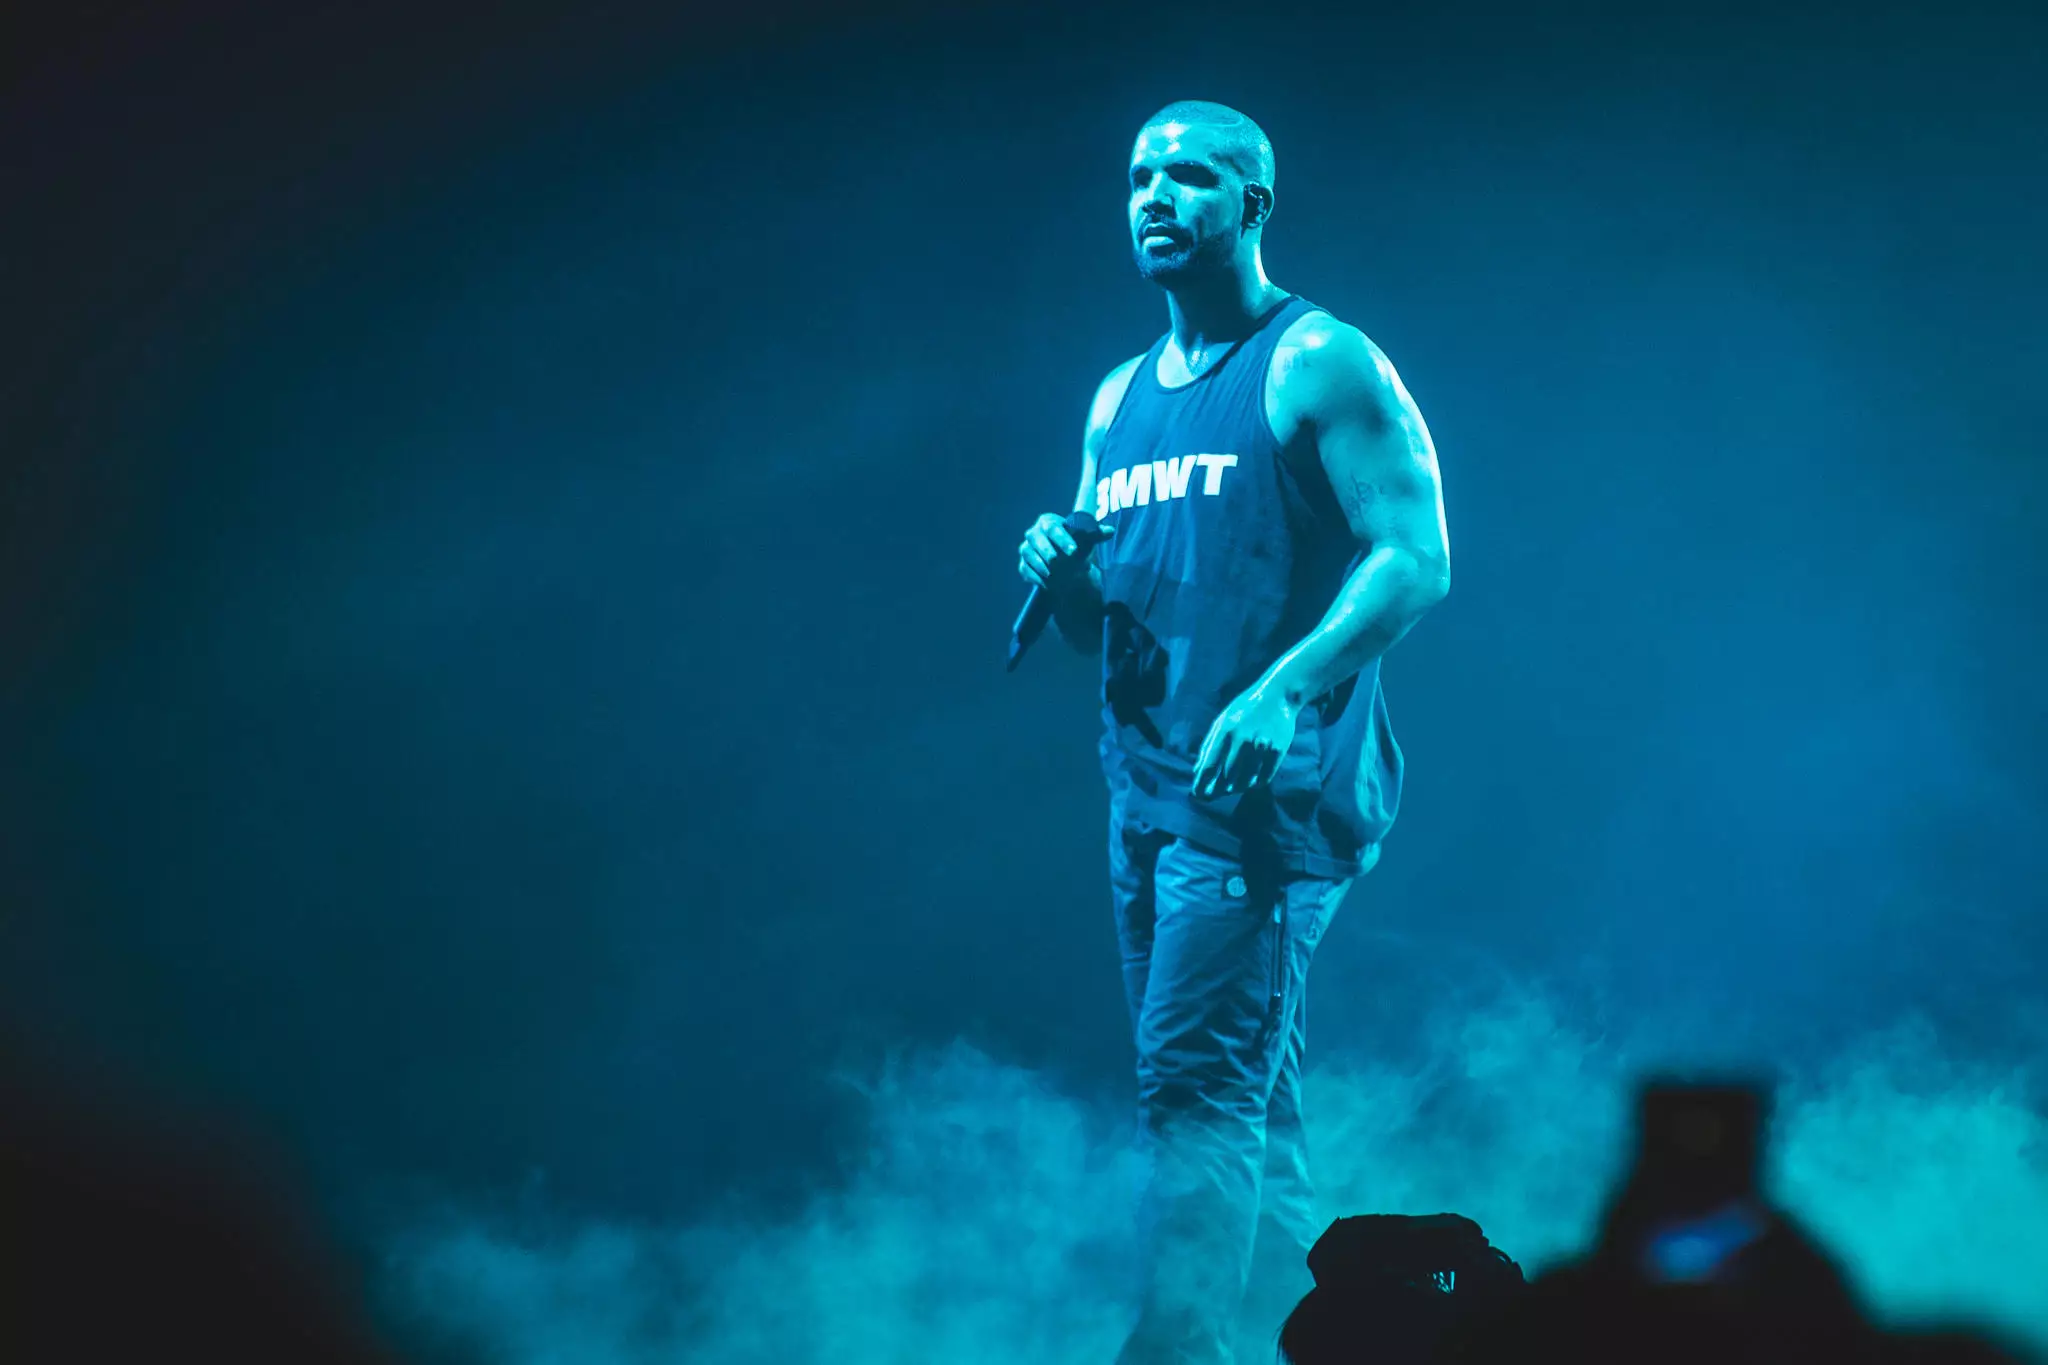 Drake was a special guest at the festival.